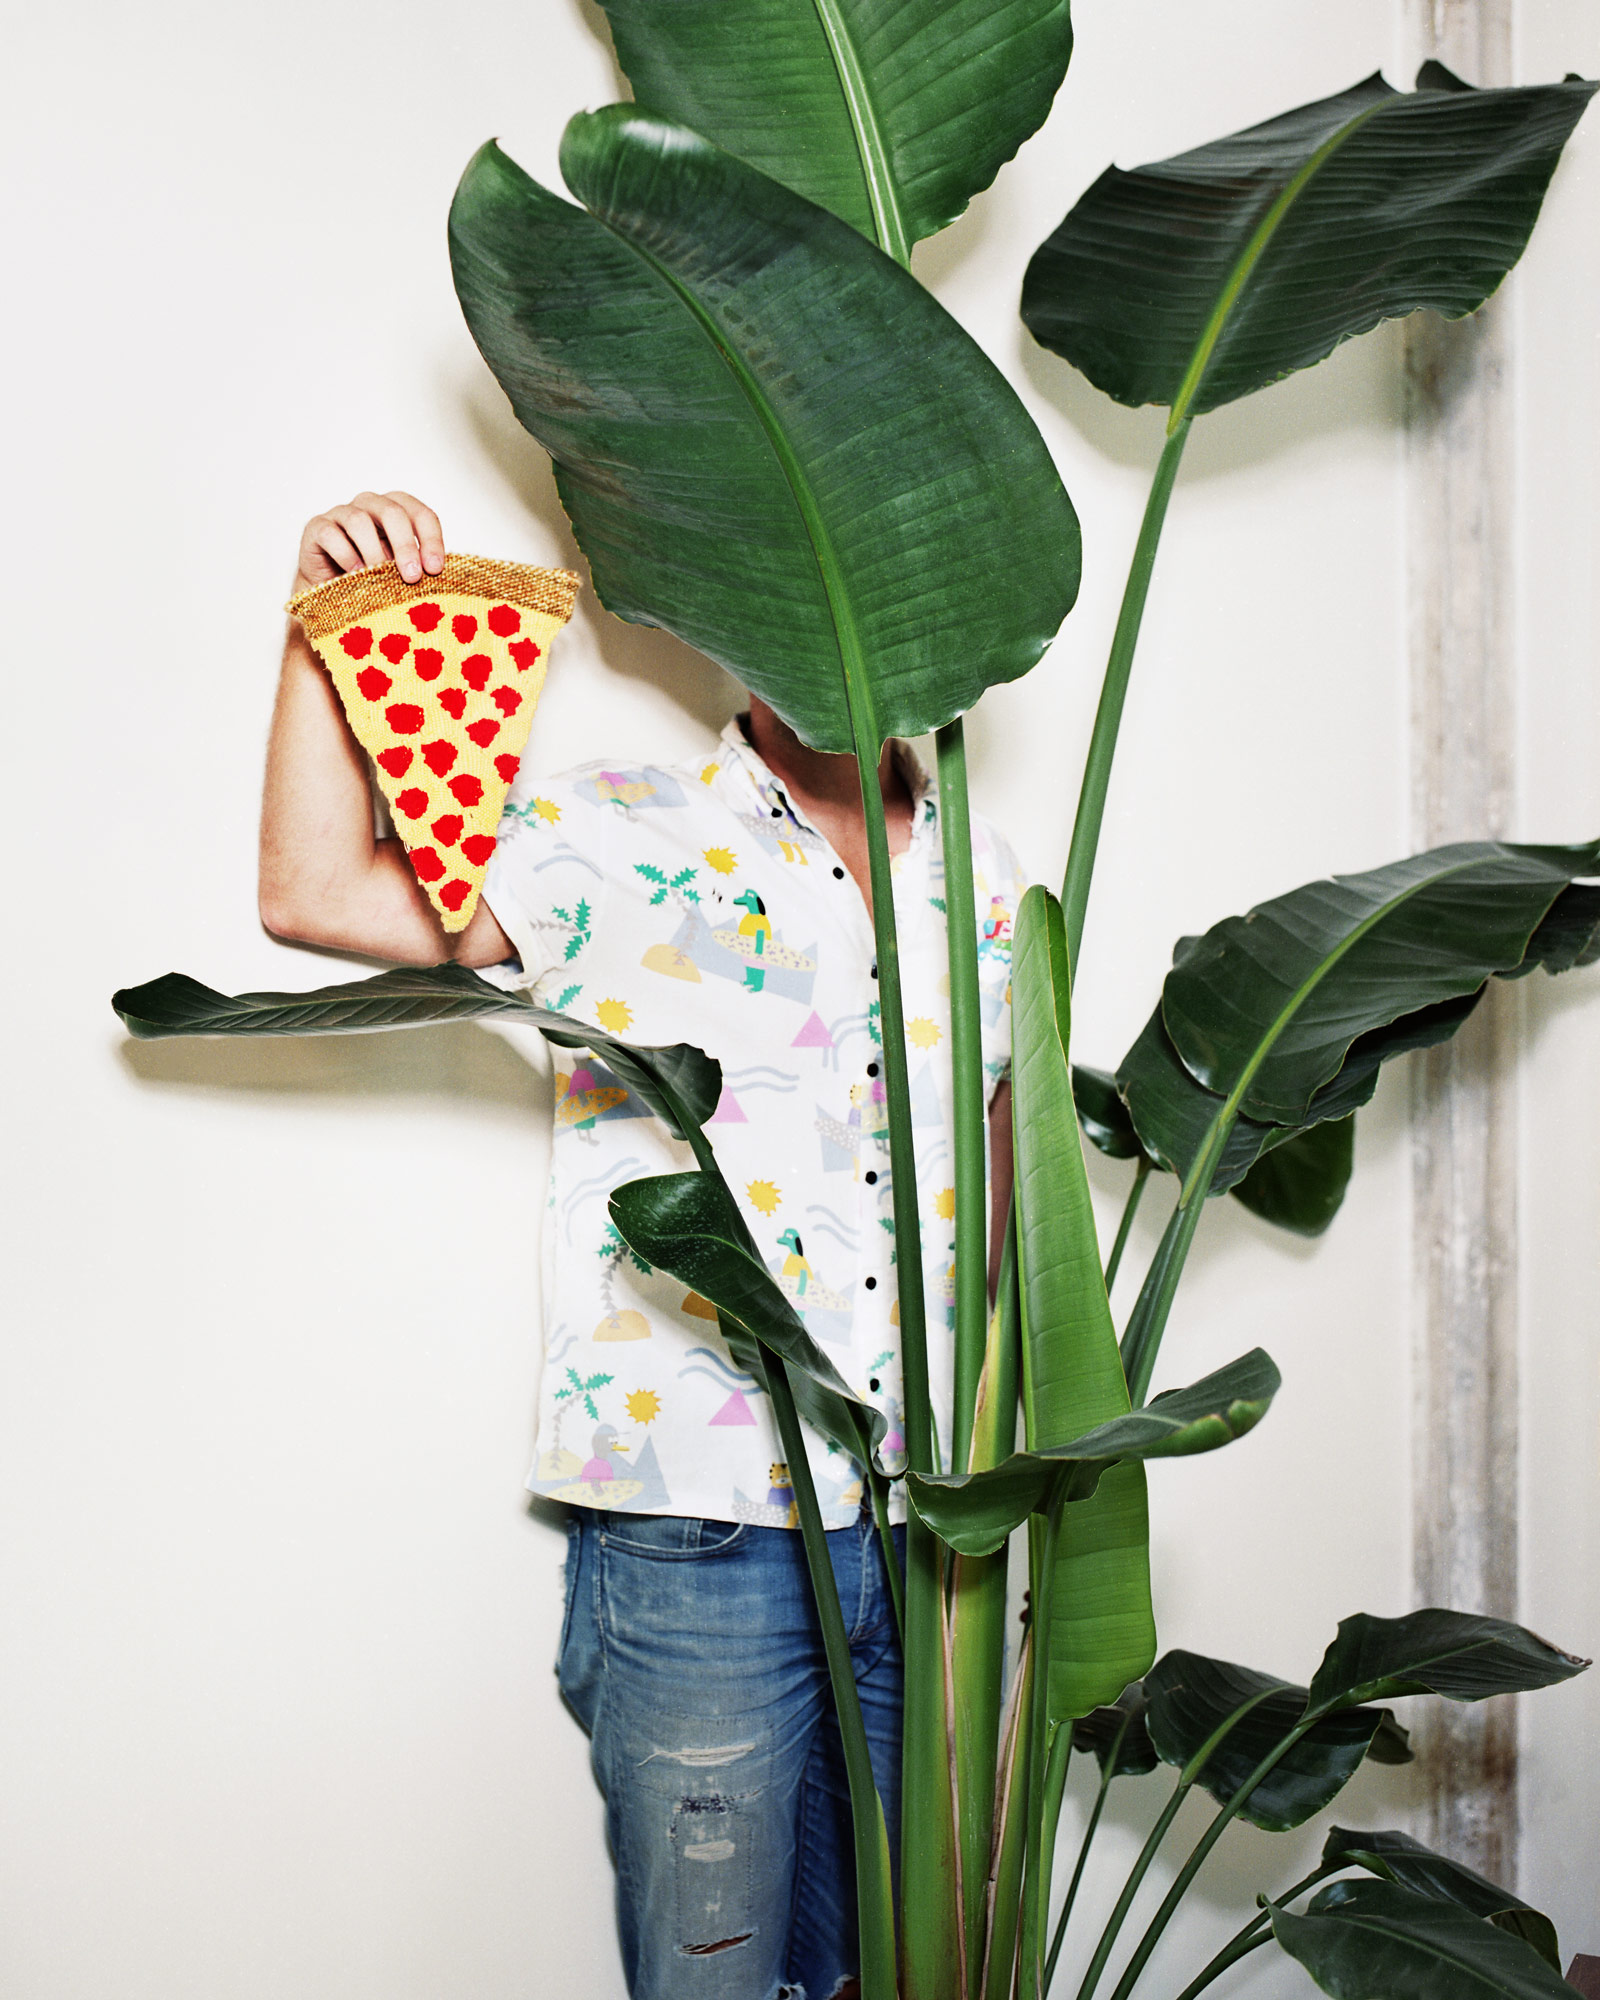 Plant and pizza: Photo by Casey Dunn